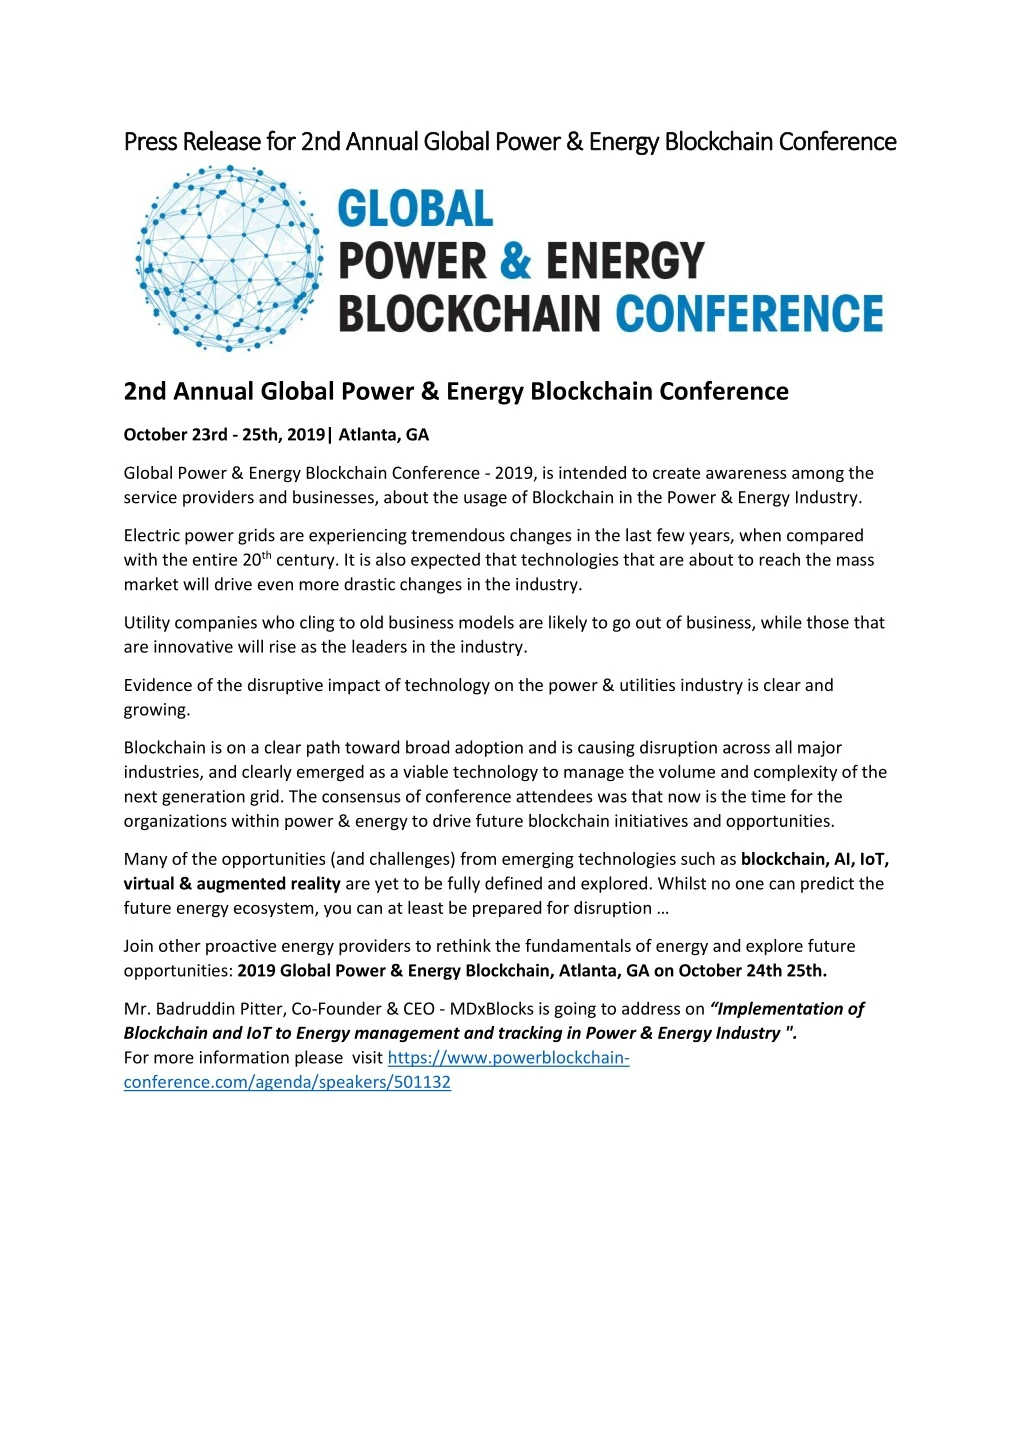 press release for 2nd annual global power energy